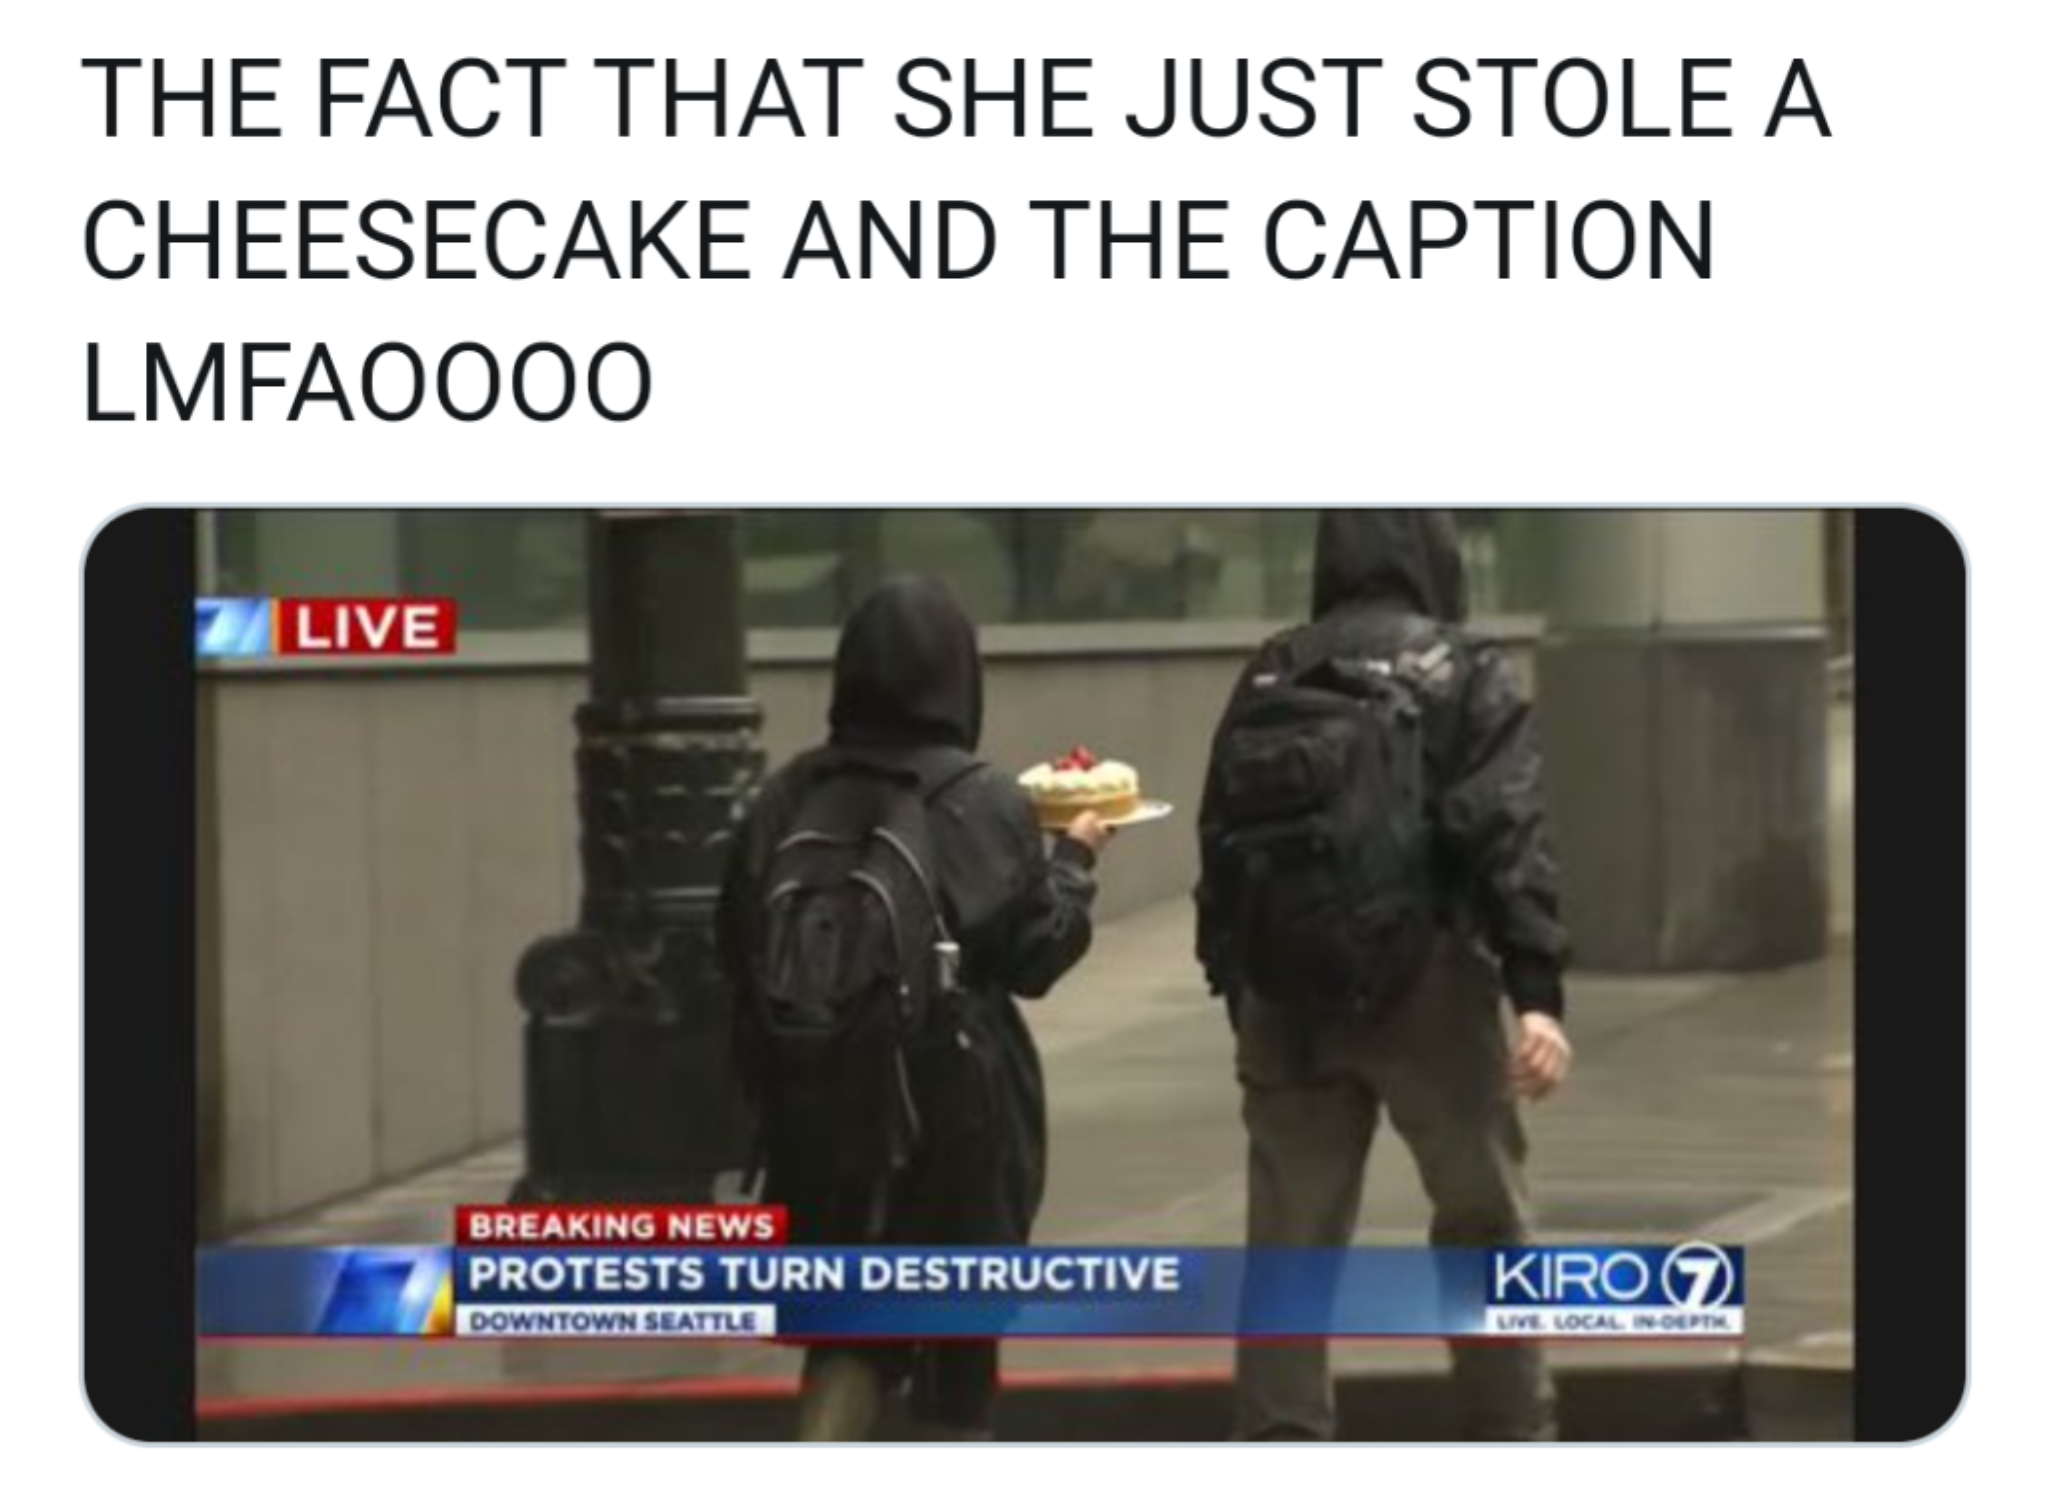 security - The Fact That She Just Stole A Cheesecake And The Caption LMFA0000 Live Breaking News Protests Turn Destructive Downtown Seattle Kiro Vive Collecte